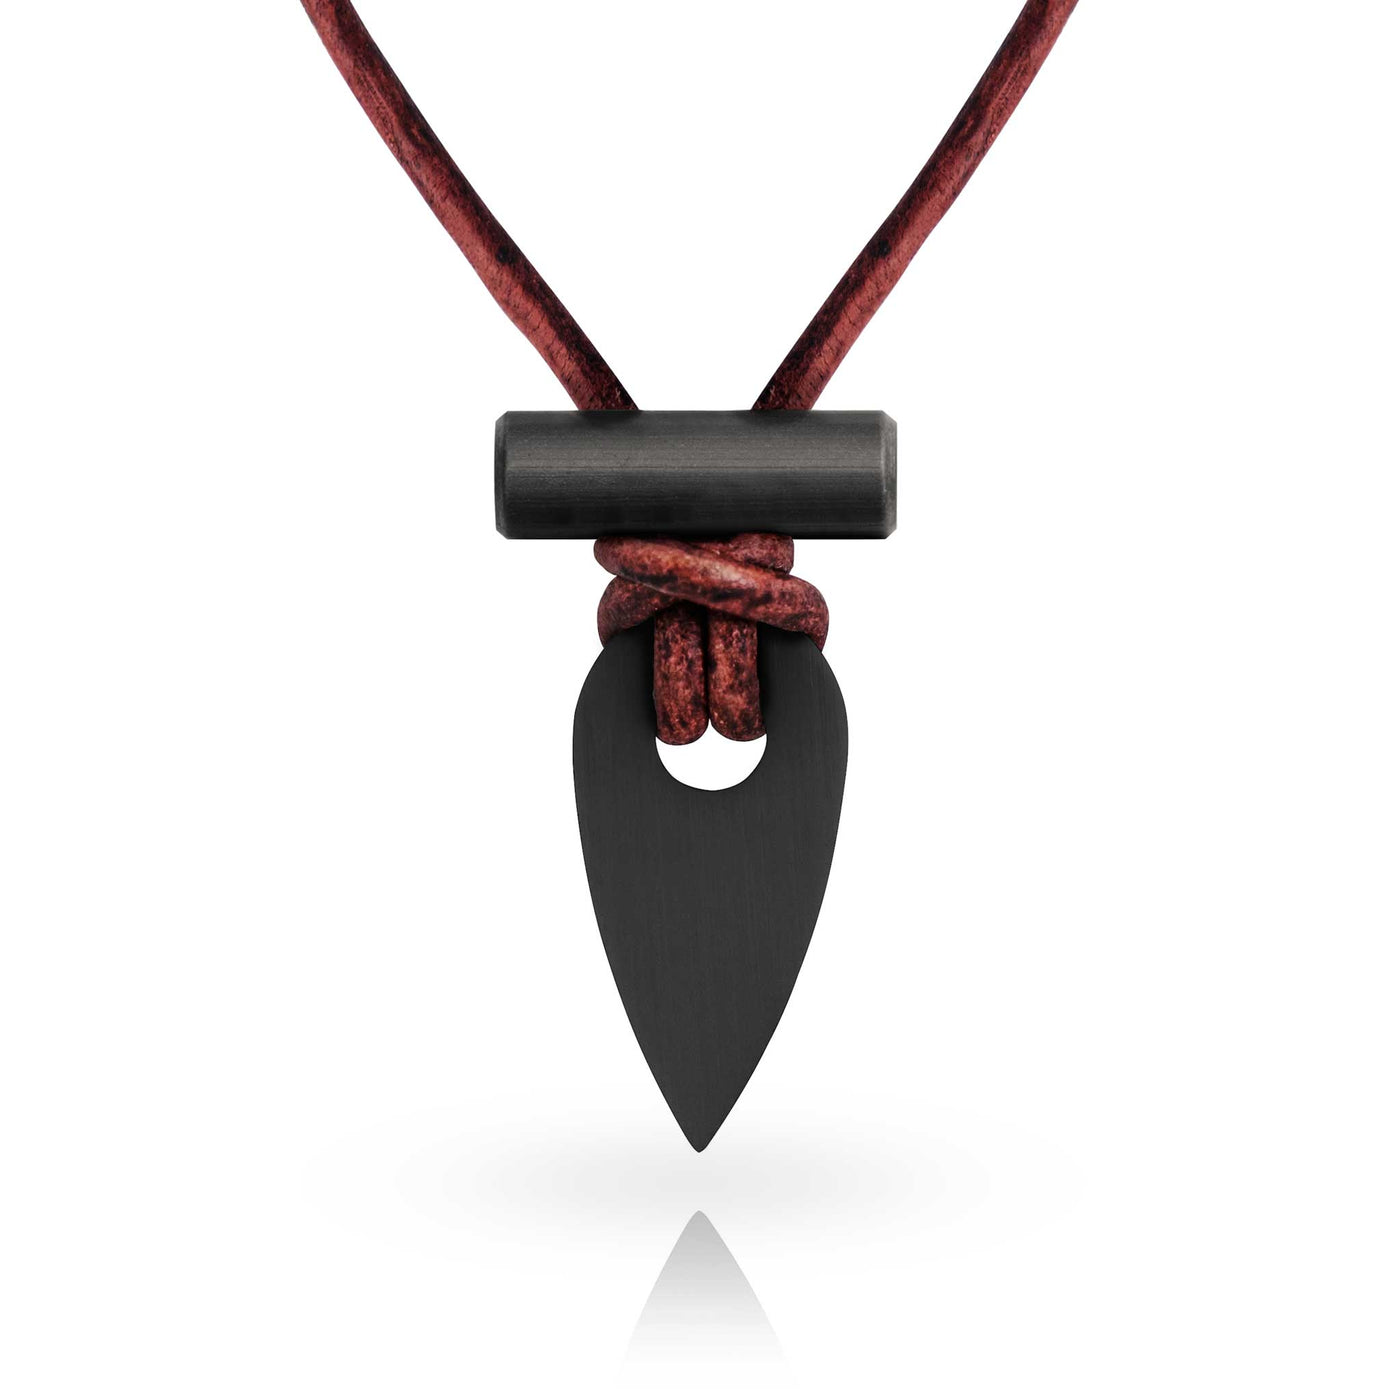 Minimalist EDC Fire Making Tool from Wazoo - The Spark Necklace